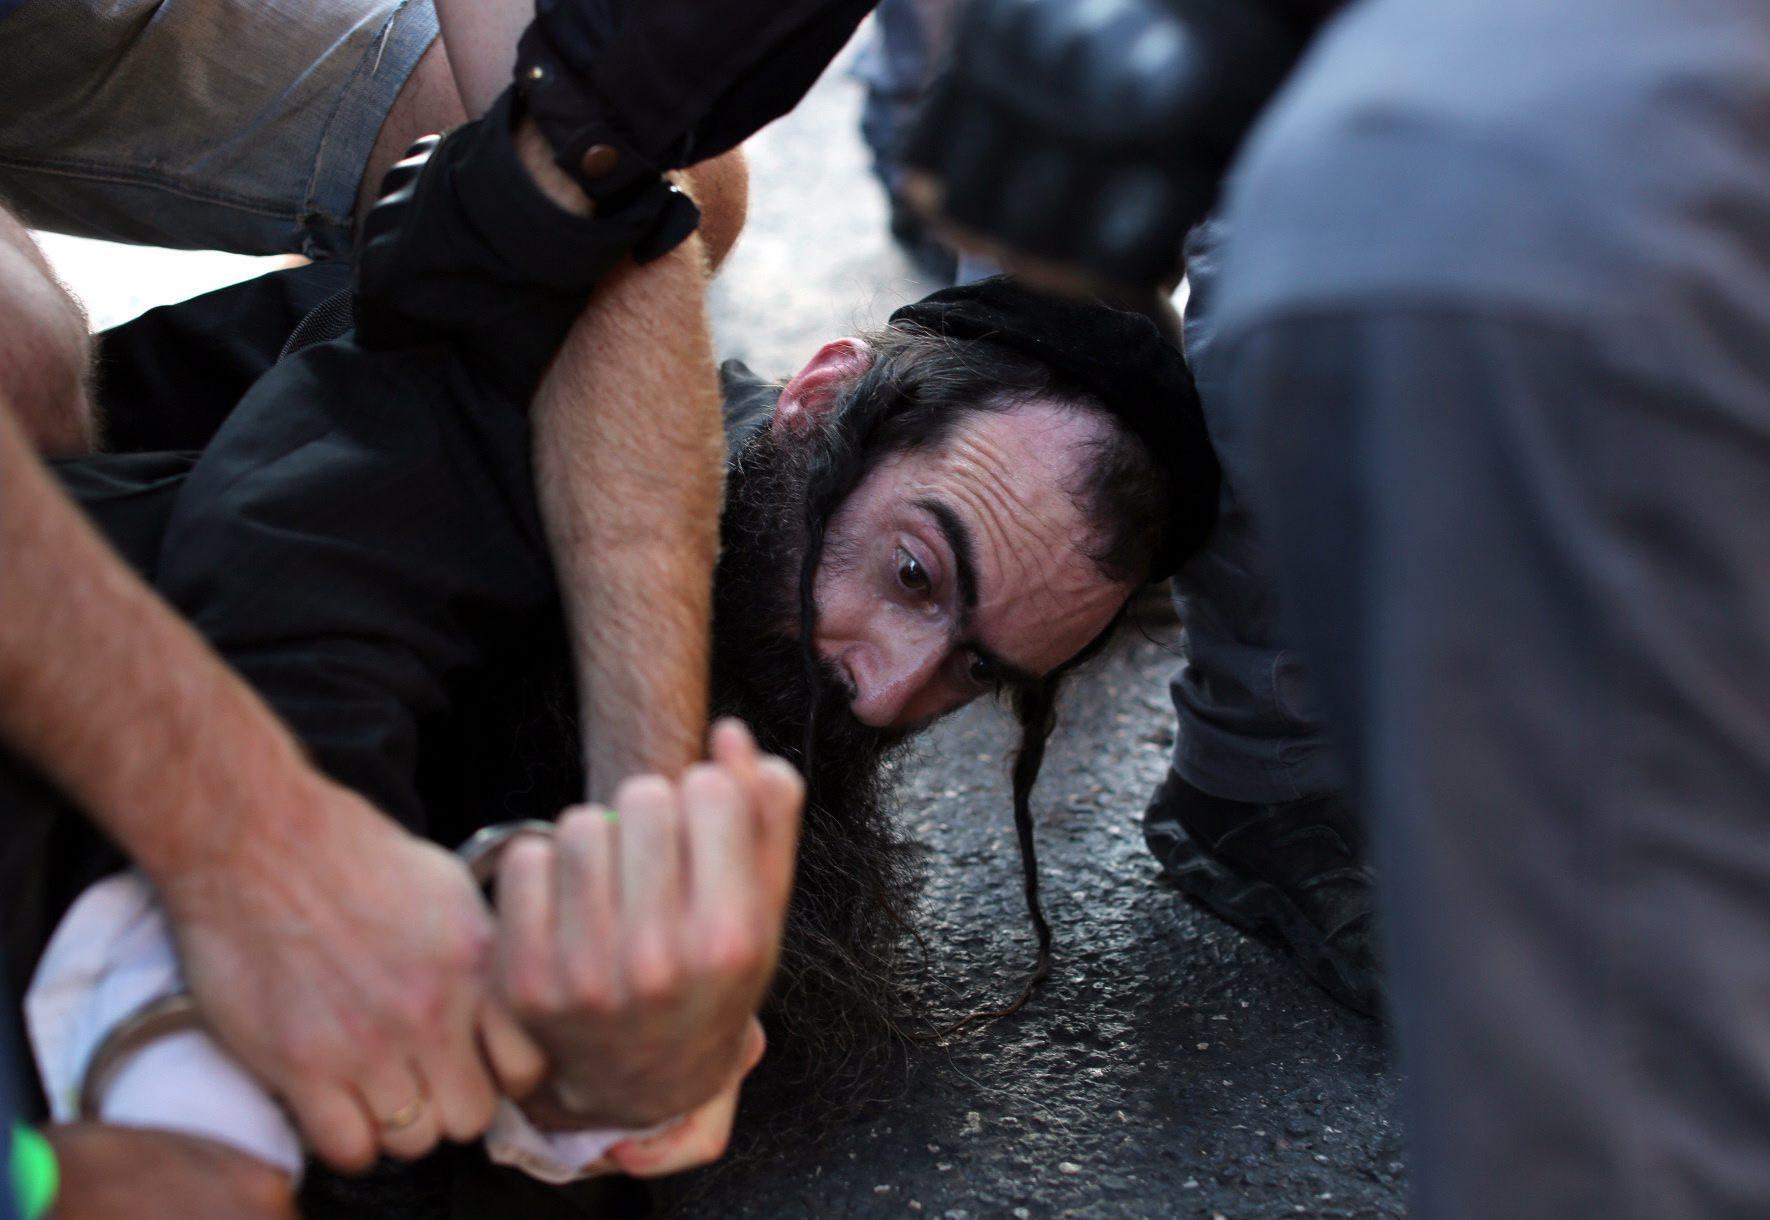 Orthodox Jew Yishai Shlissel arrested after stabbing people during Gay Parade in Jerusalem